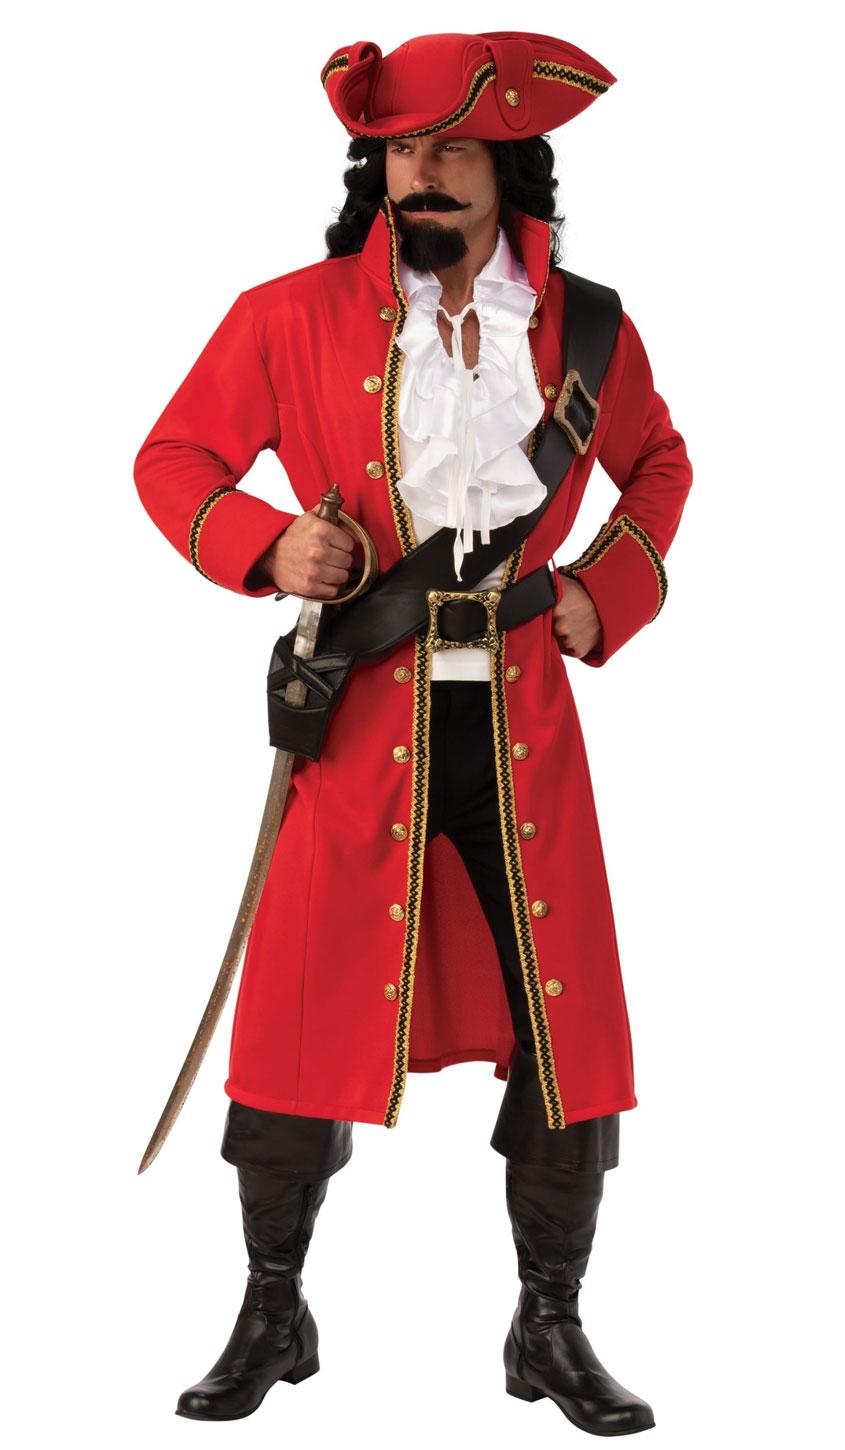 Authentic Pirate Captain Costume for Adults by Rubies 700888 available in the UK here at Karnival Costumes online party shop